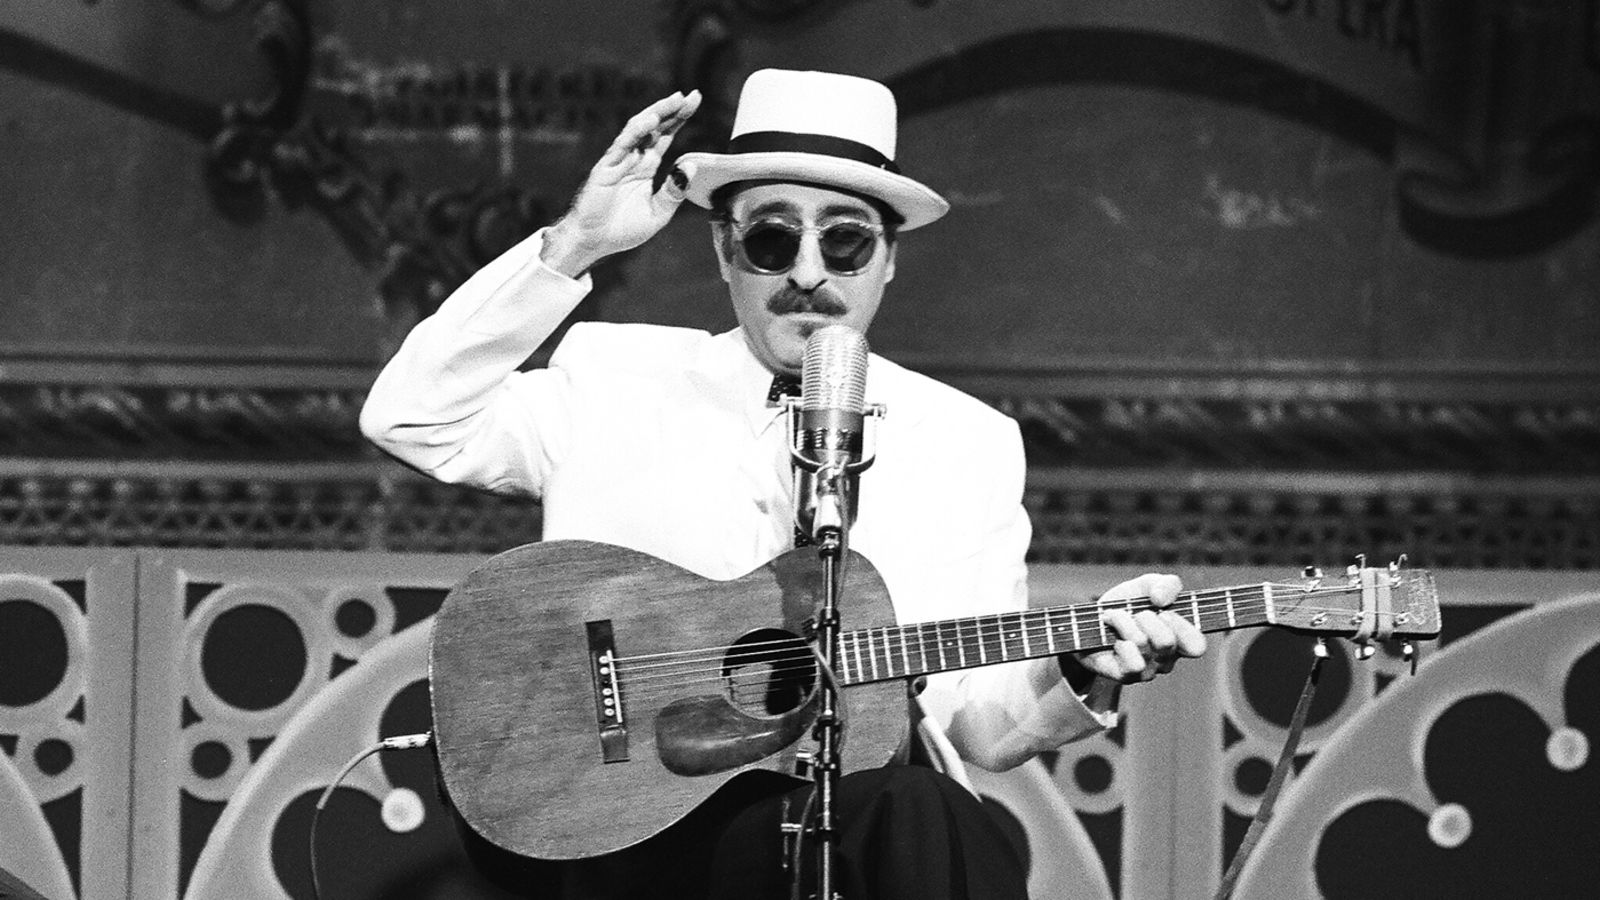 Illustration for article titled RIP Leon Redbone